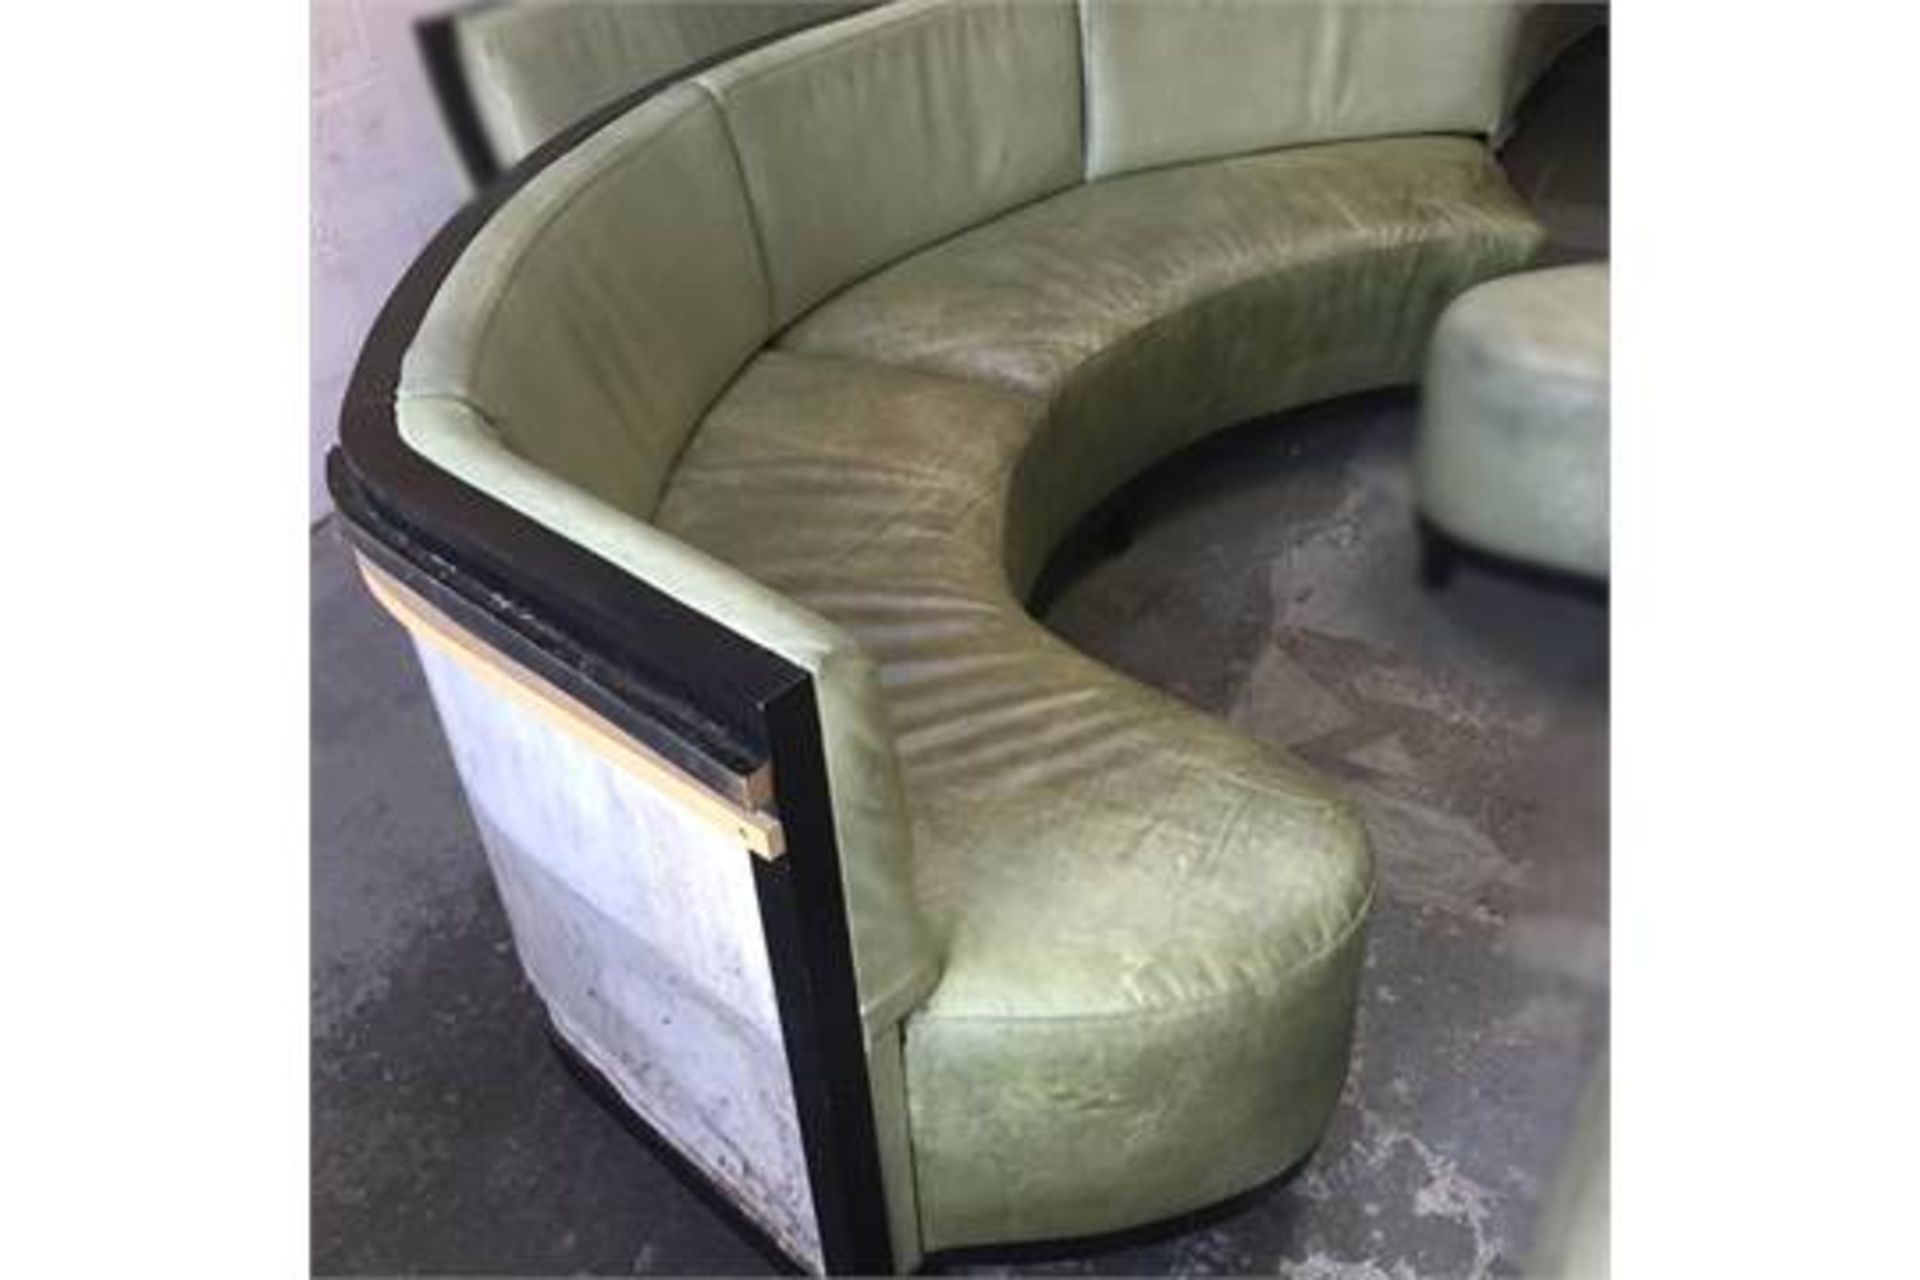 1 x Luxury Upholstered Curved Seating Area - Recently Removed From Nobu - Dimensions: W285 x D62cm x - Image 6 of 6